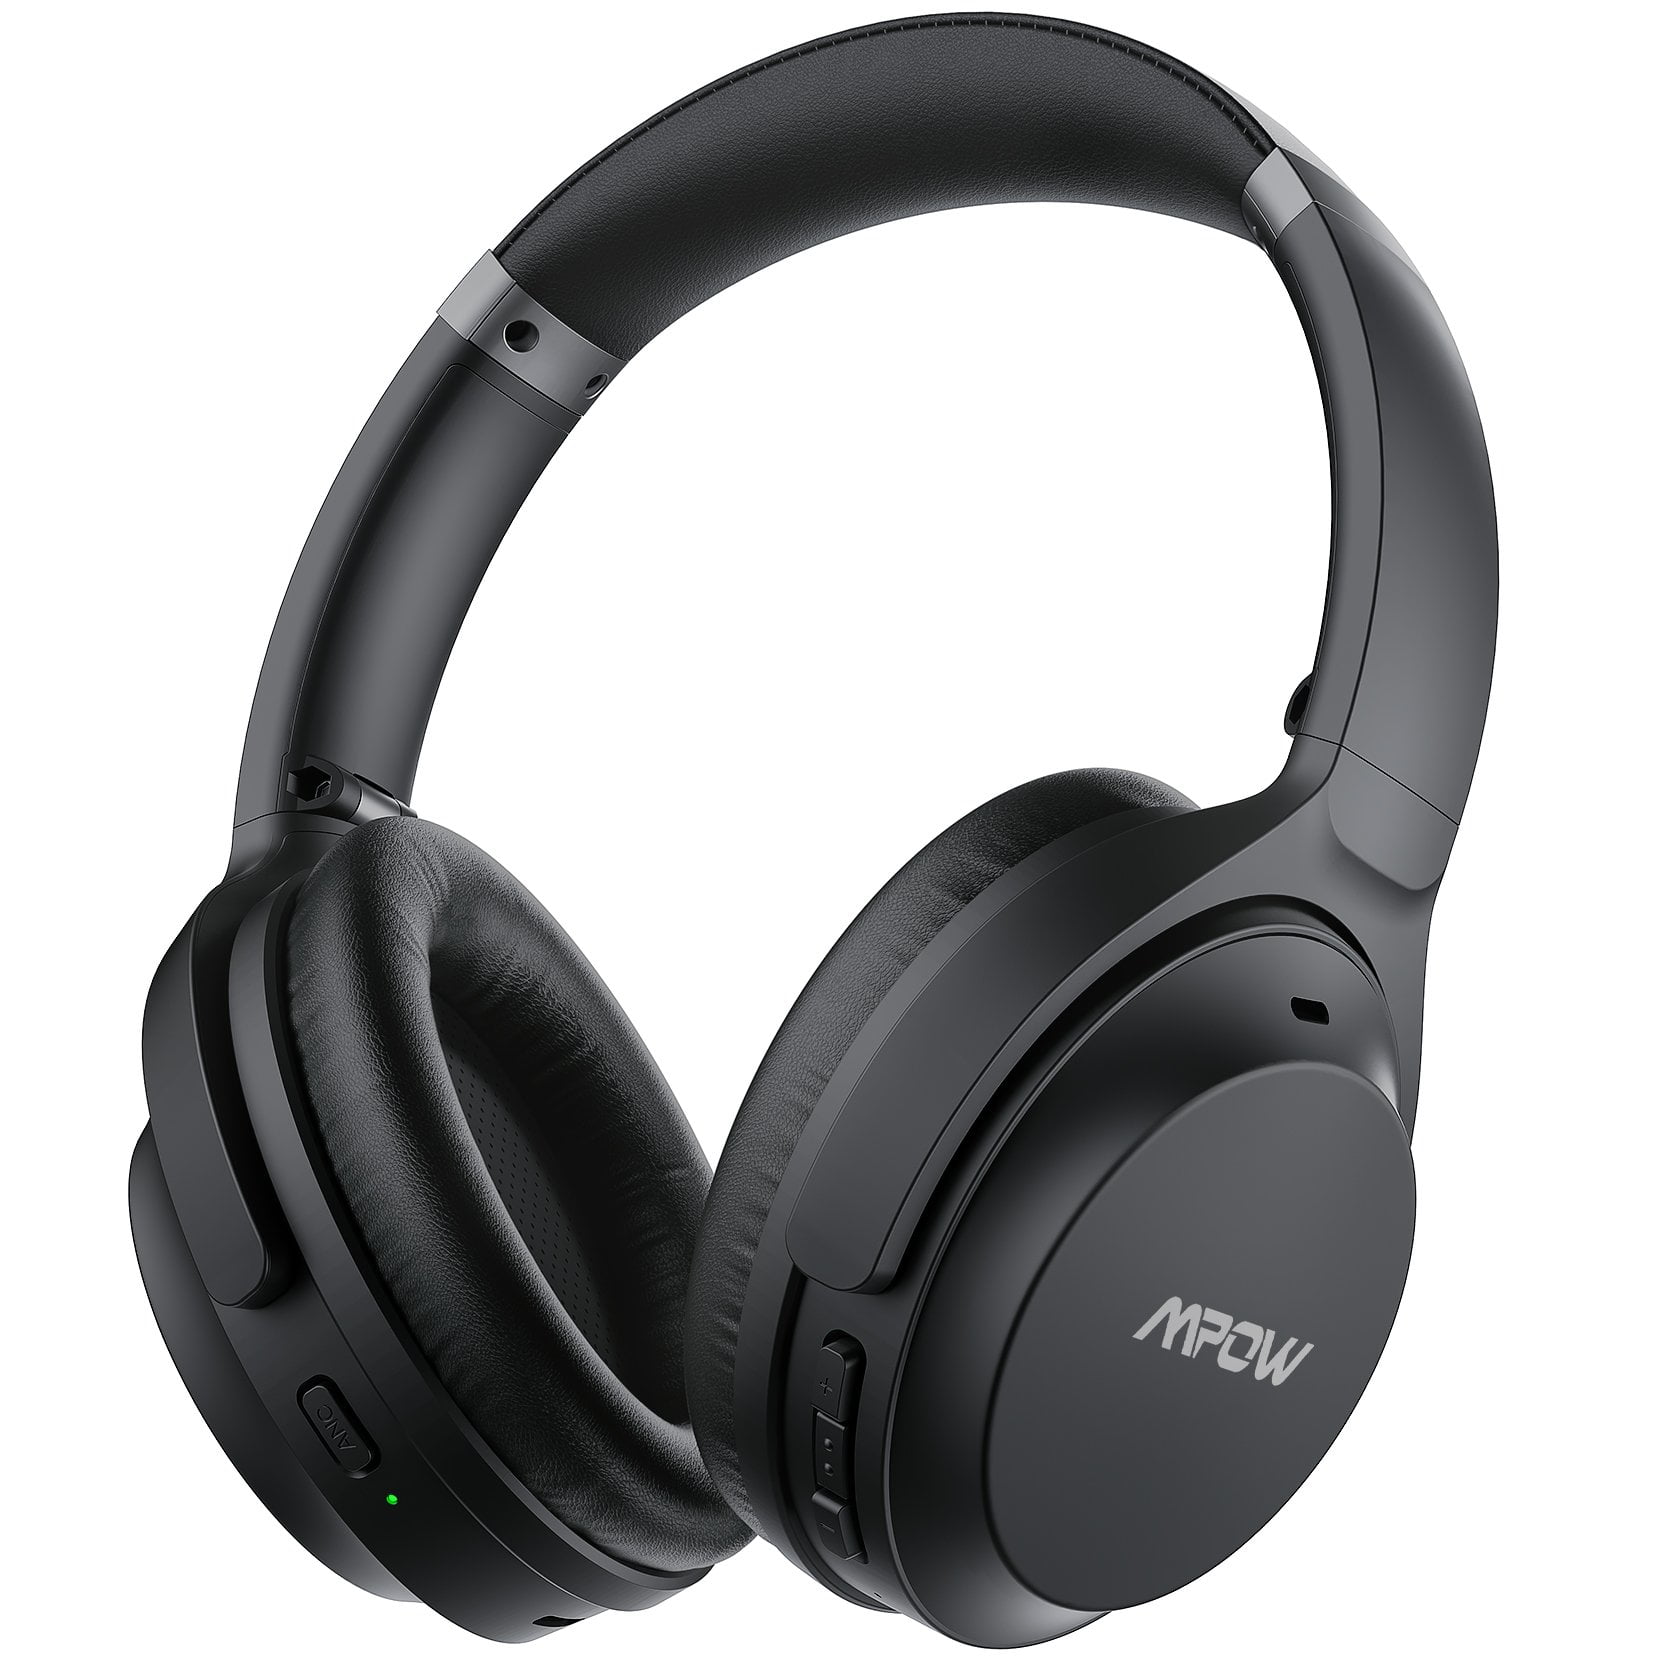 Mpow H7 Bluetooth Headphones, Comfortable Over Ear Wireless